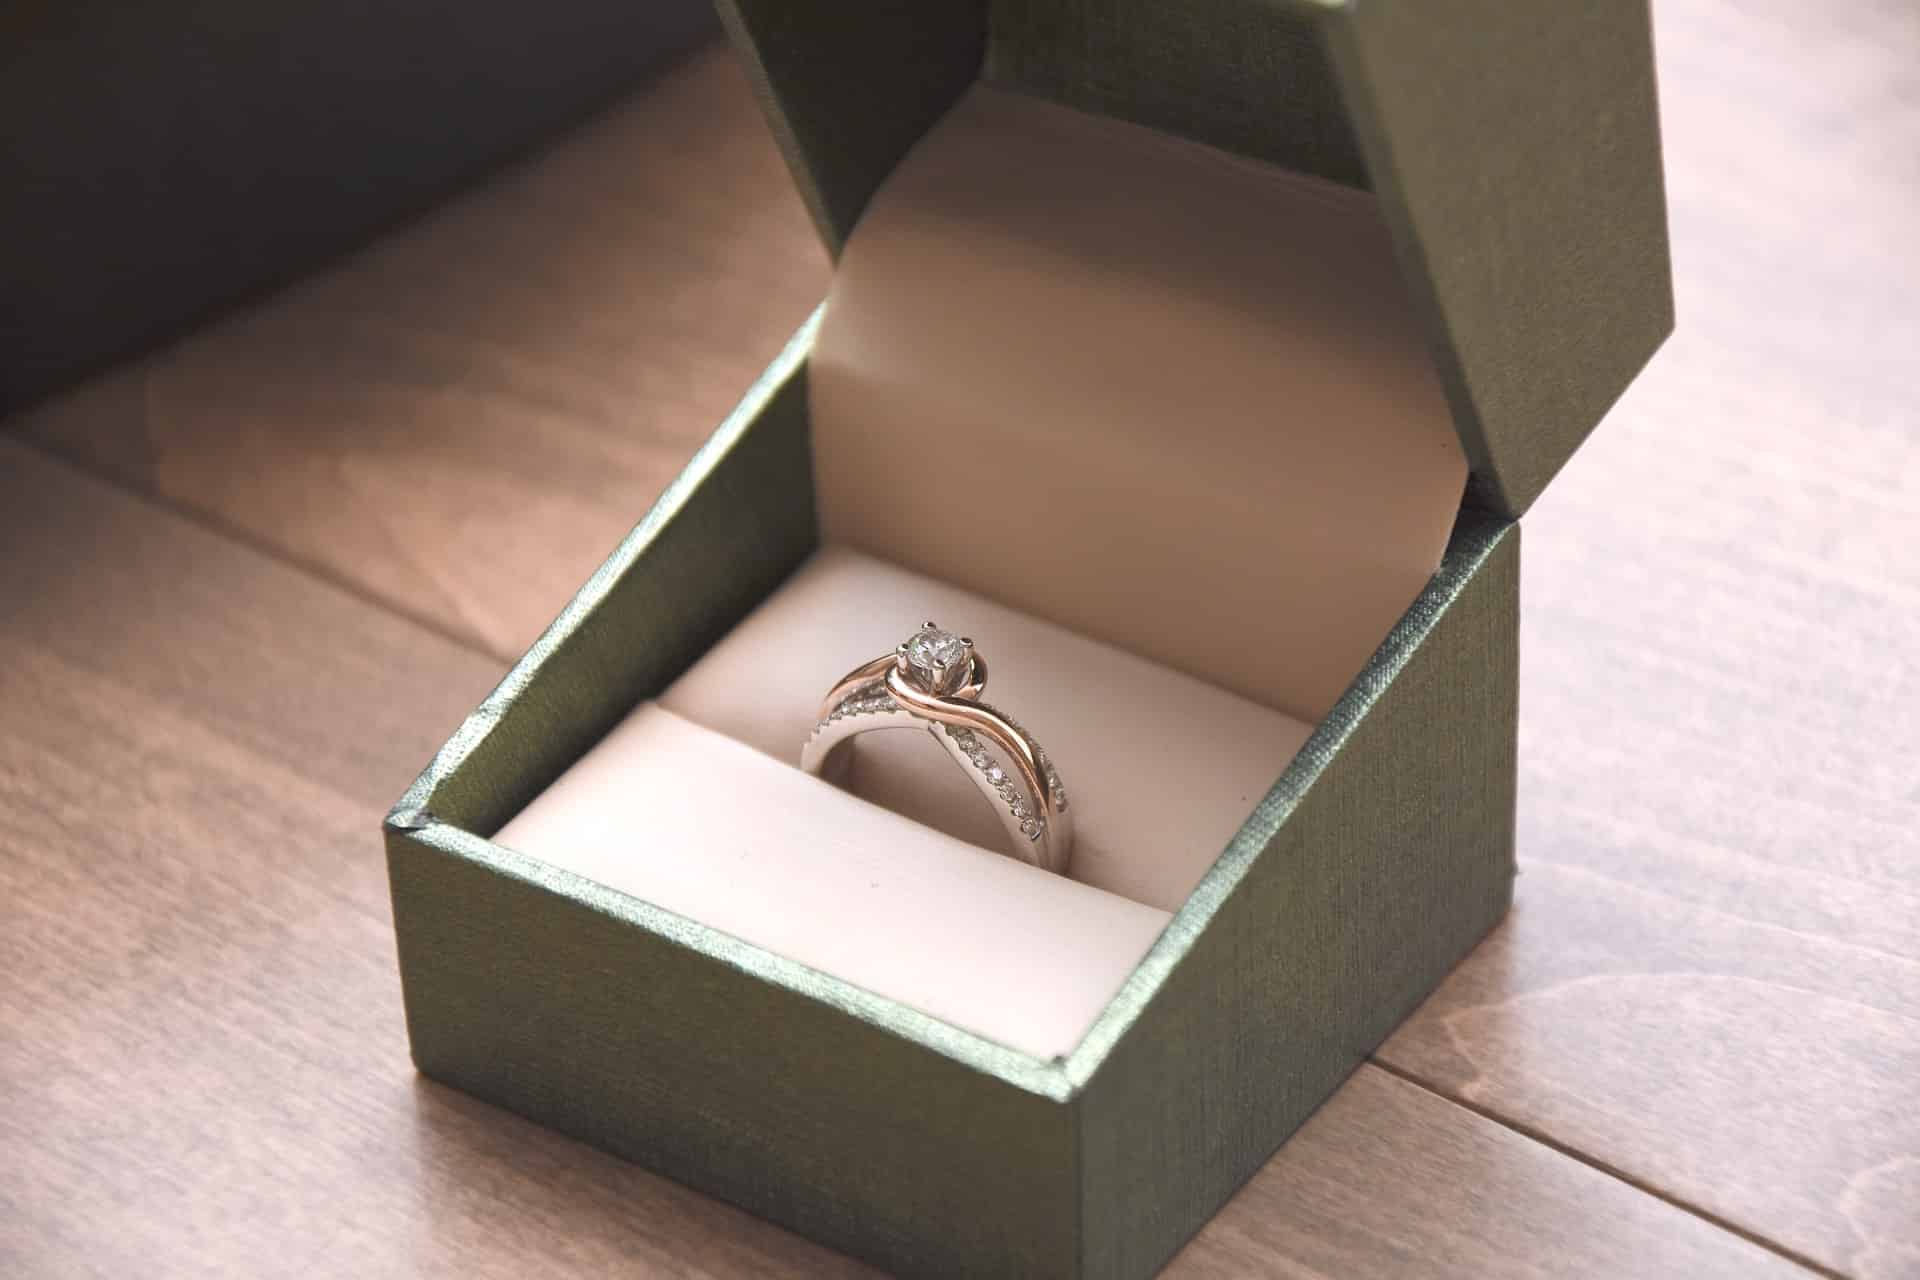 Getting Her An Engagement Ring – Doing It Right With These Tips